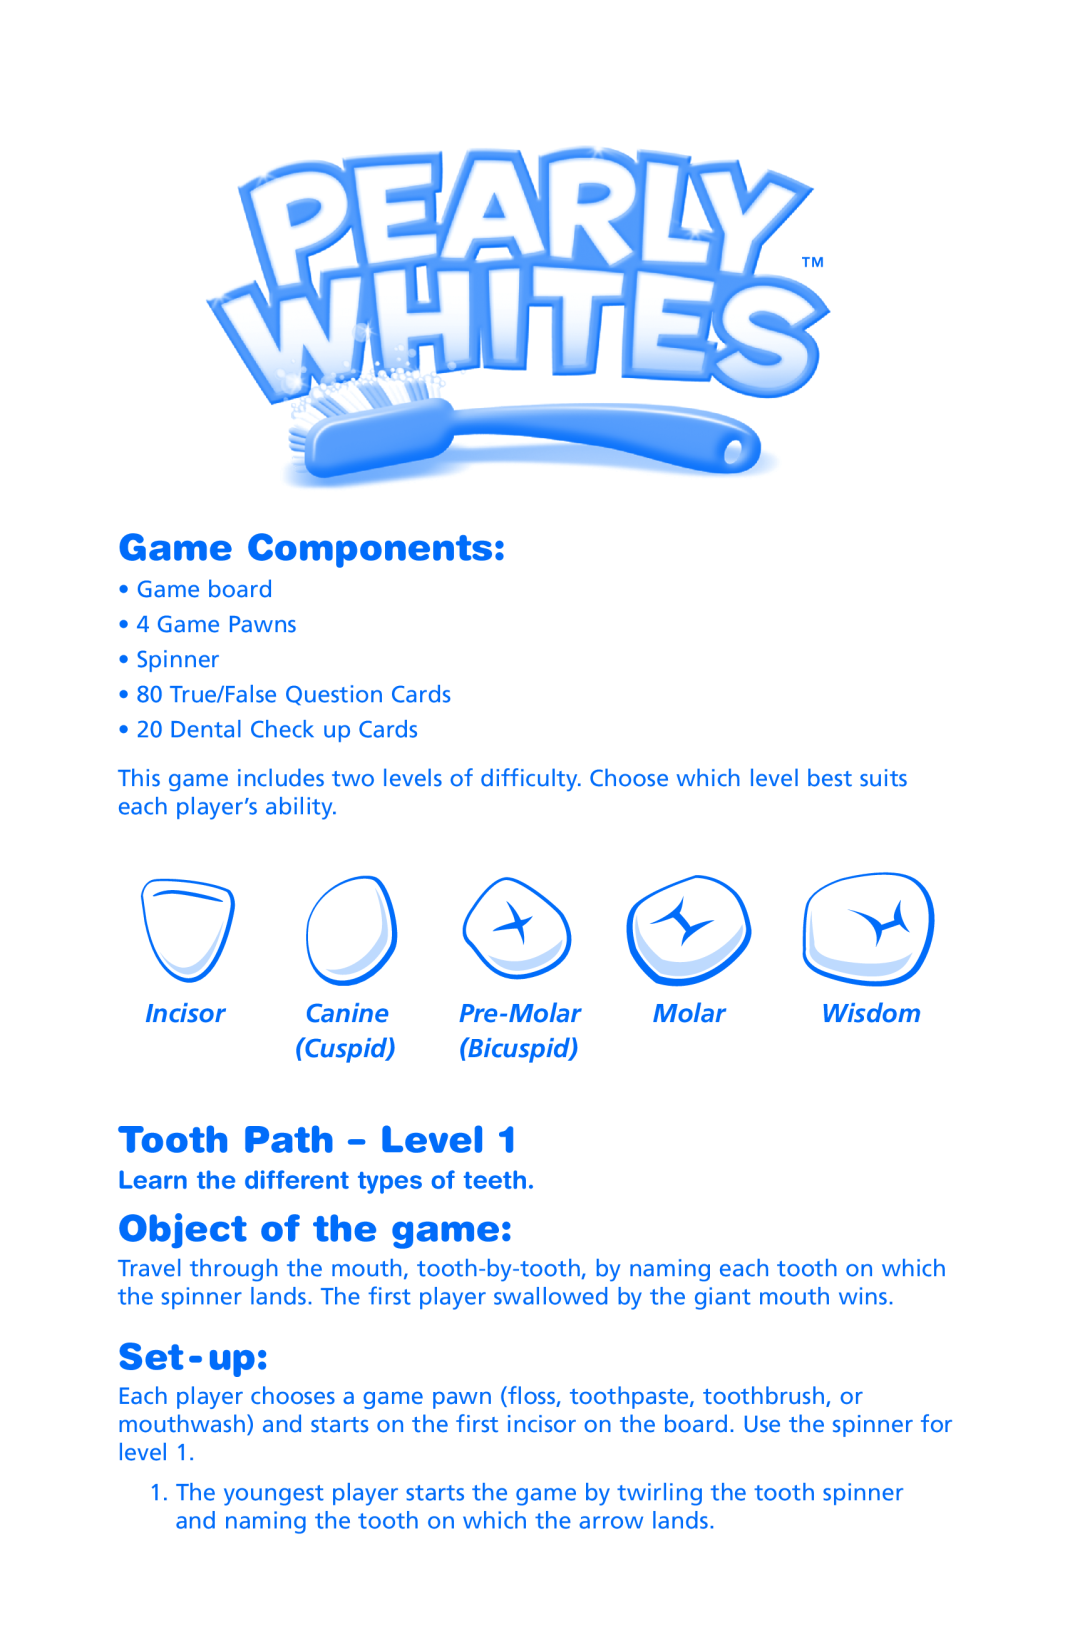 Learning Resources LER 7340 Game Components, Tooth Path - Level, Object of the game, Set - up, Incisor, Canine, Pre-Molar 